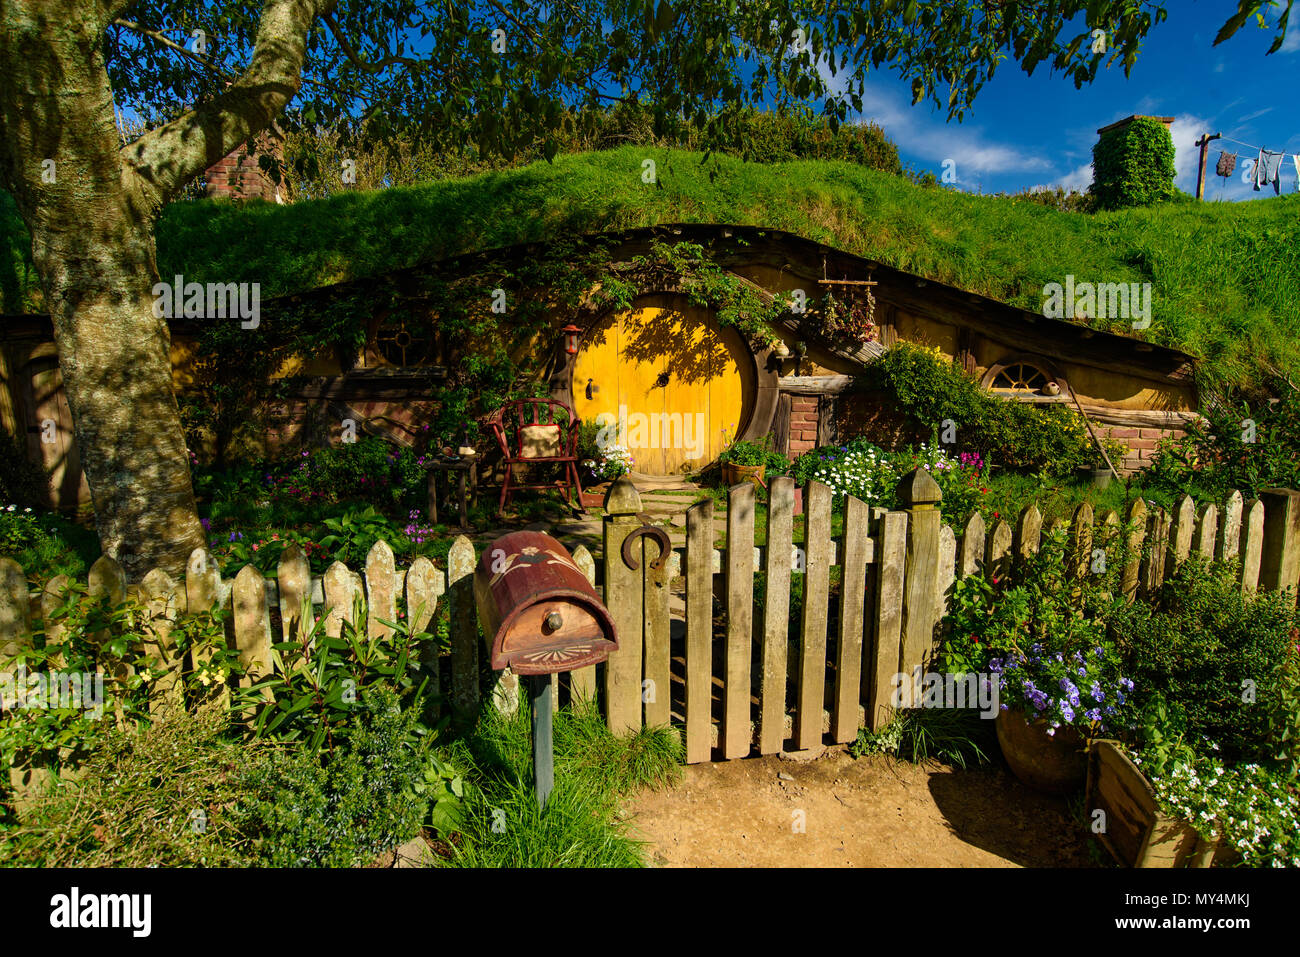 Hobbiton Movie Set of Shire in The Lord of the Rings and The Hobbit trilogies, Matamata Stock Photo